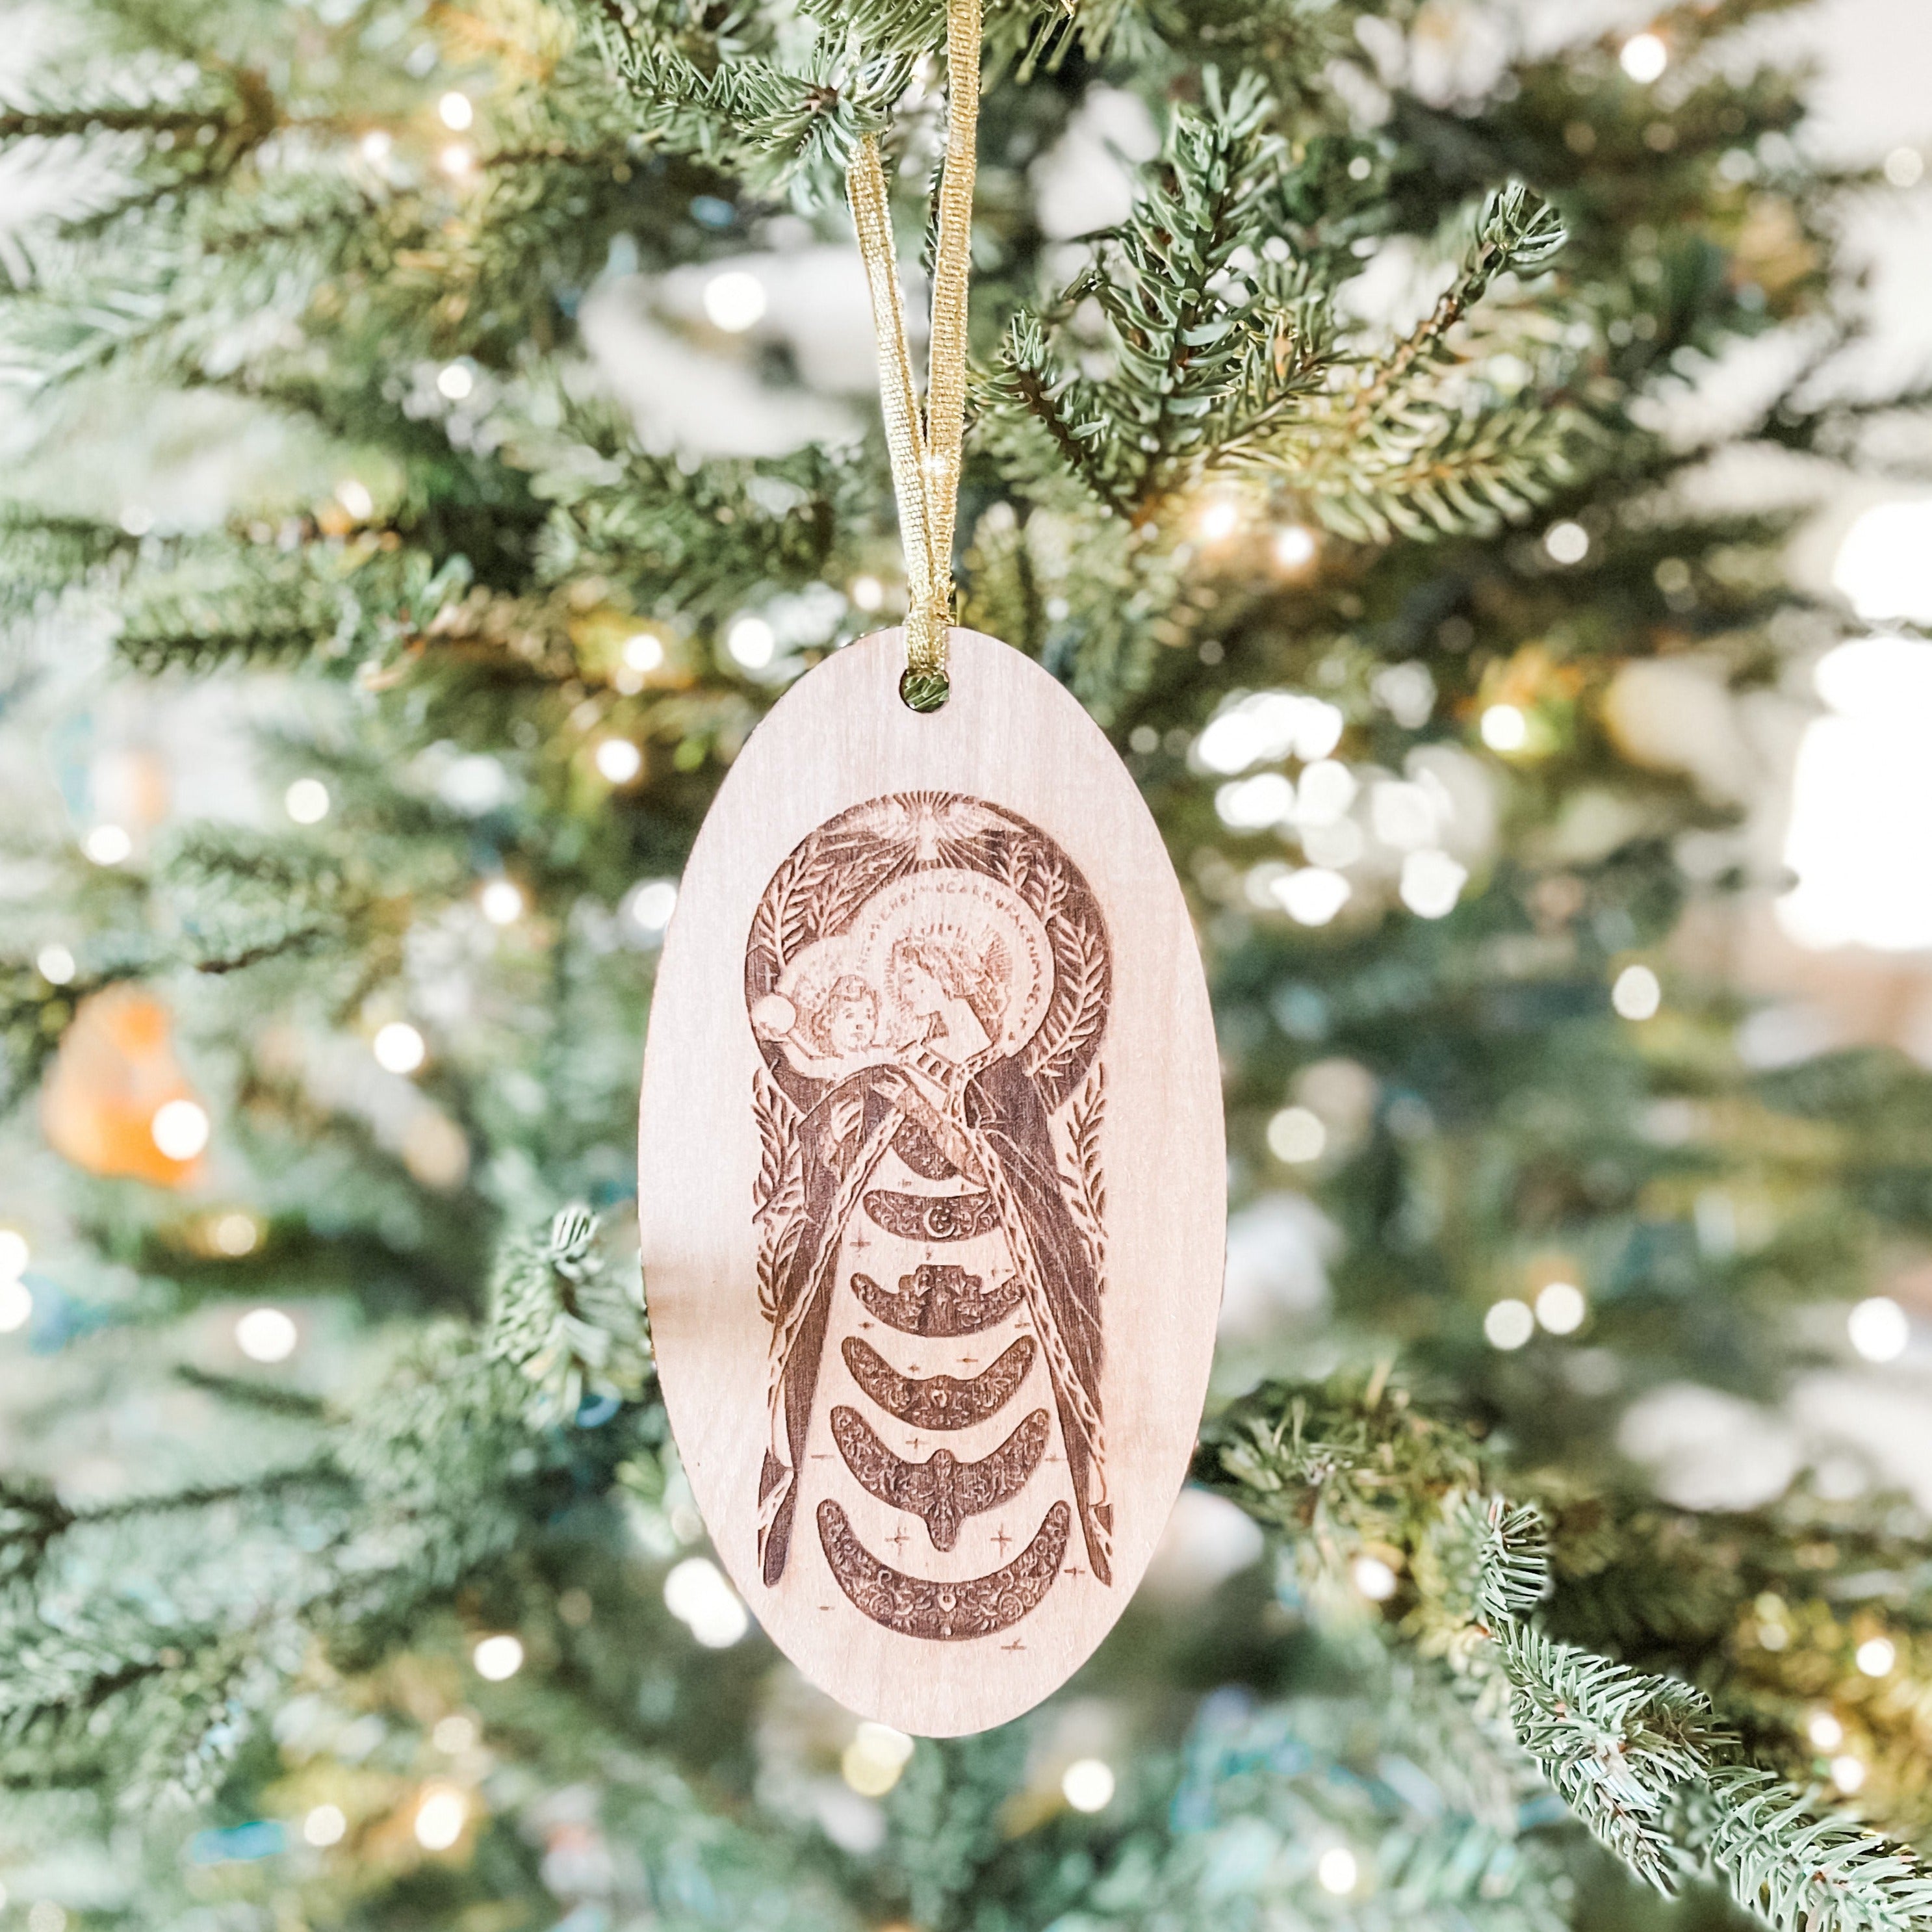 Our Lady of Loreto Wooden Ornament